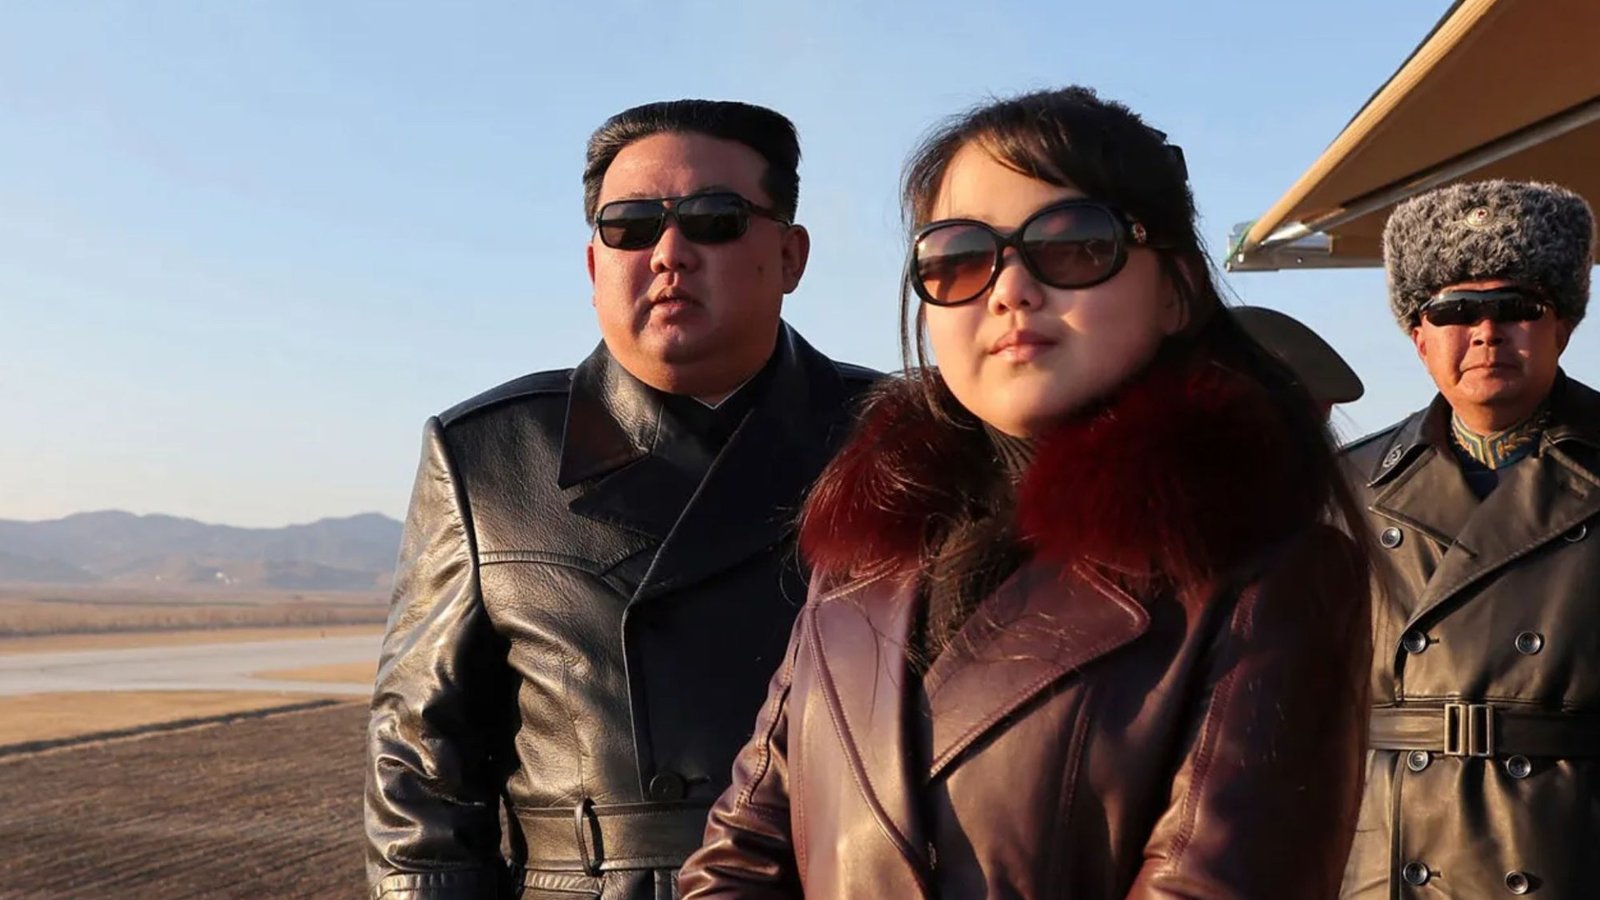 Key clue Kim Jong uns daughter will become North Koreas next feared tyrant hidden in snaps with dictator dad